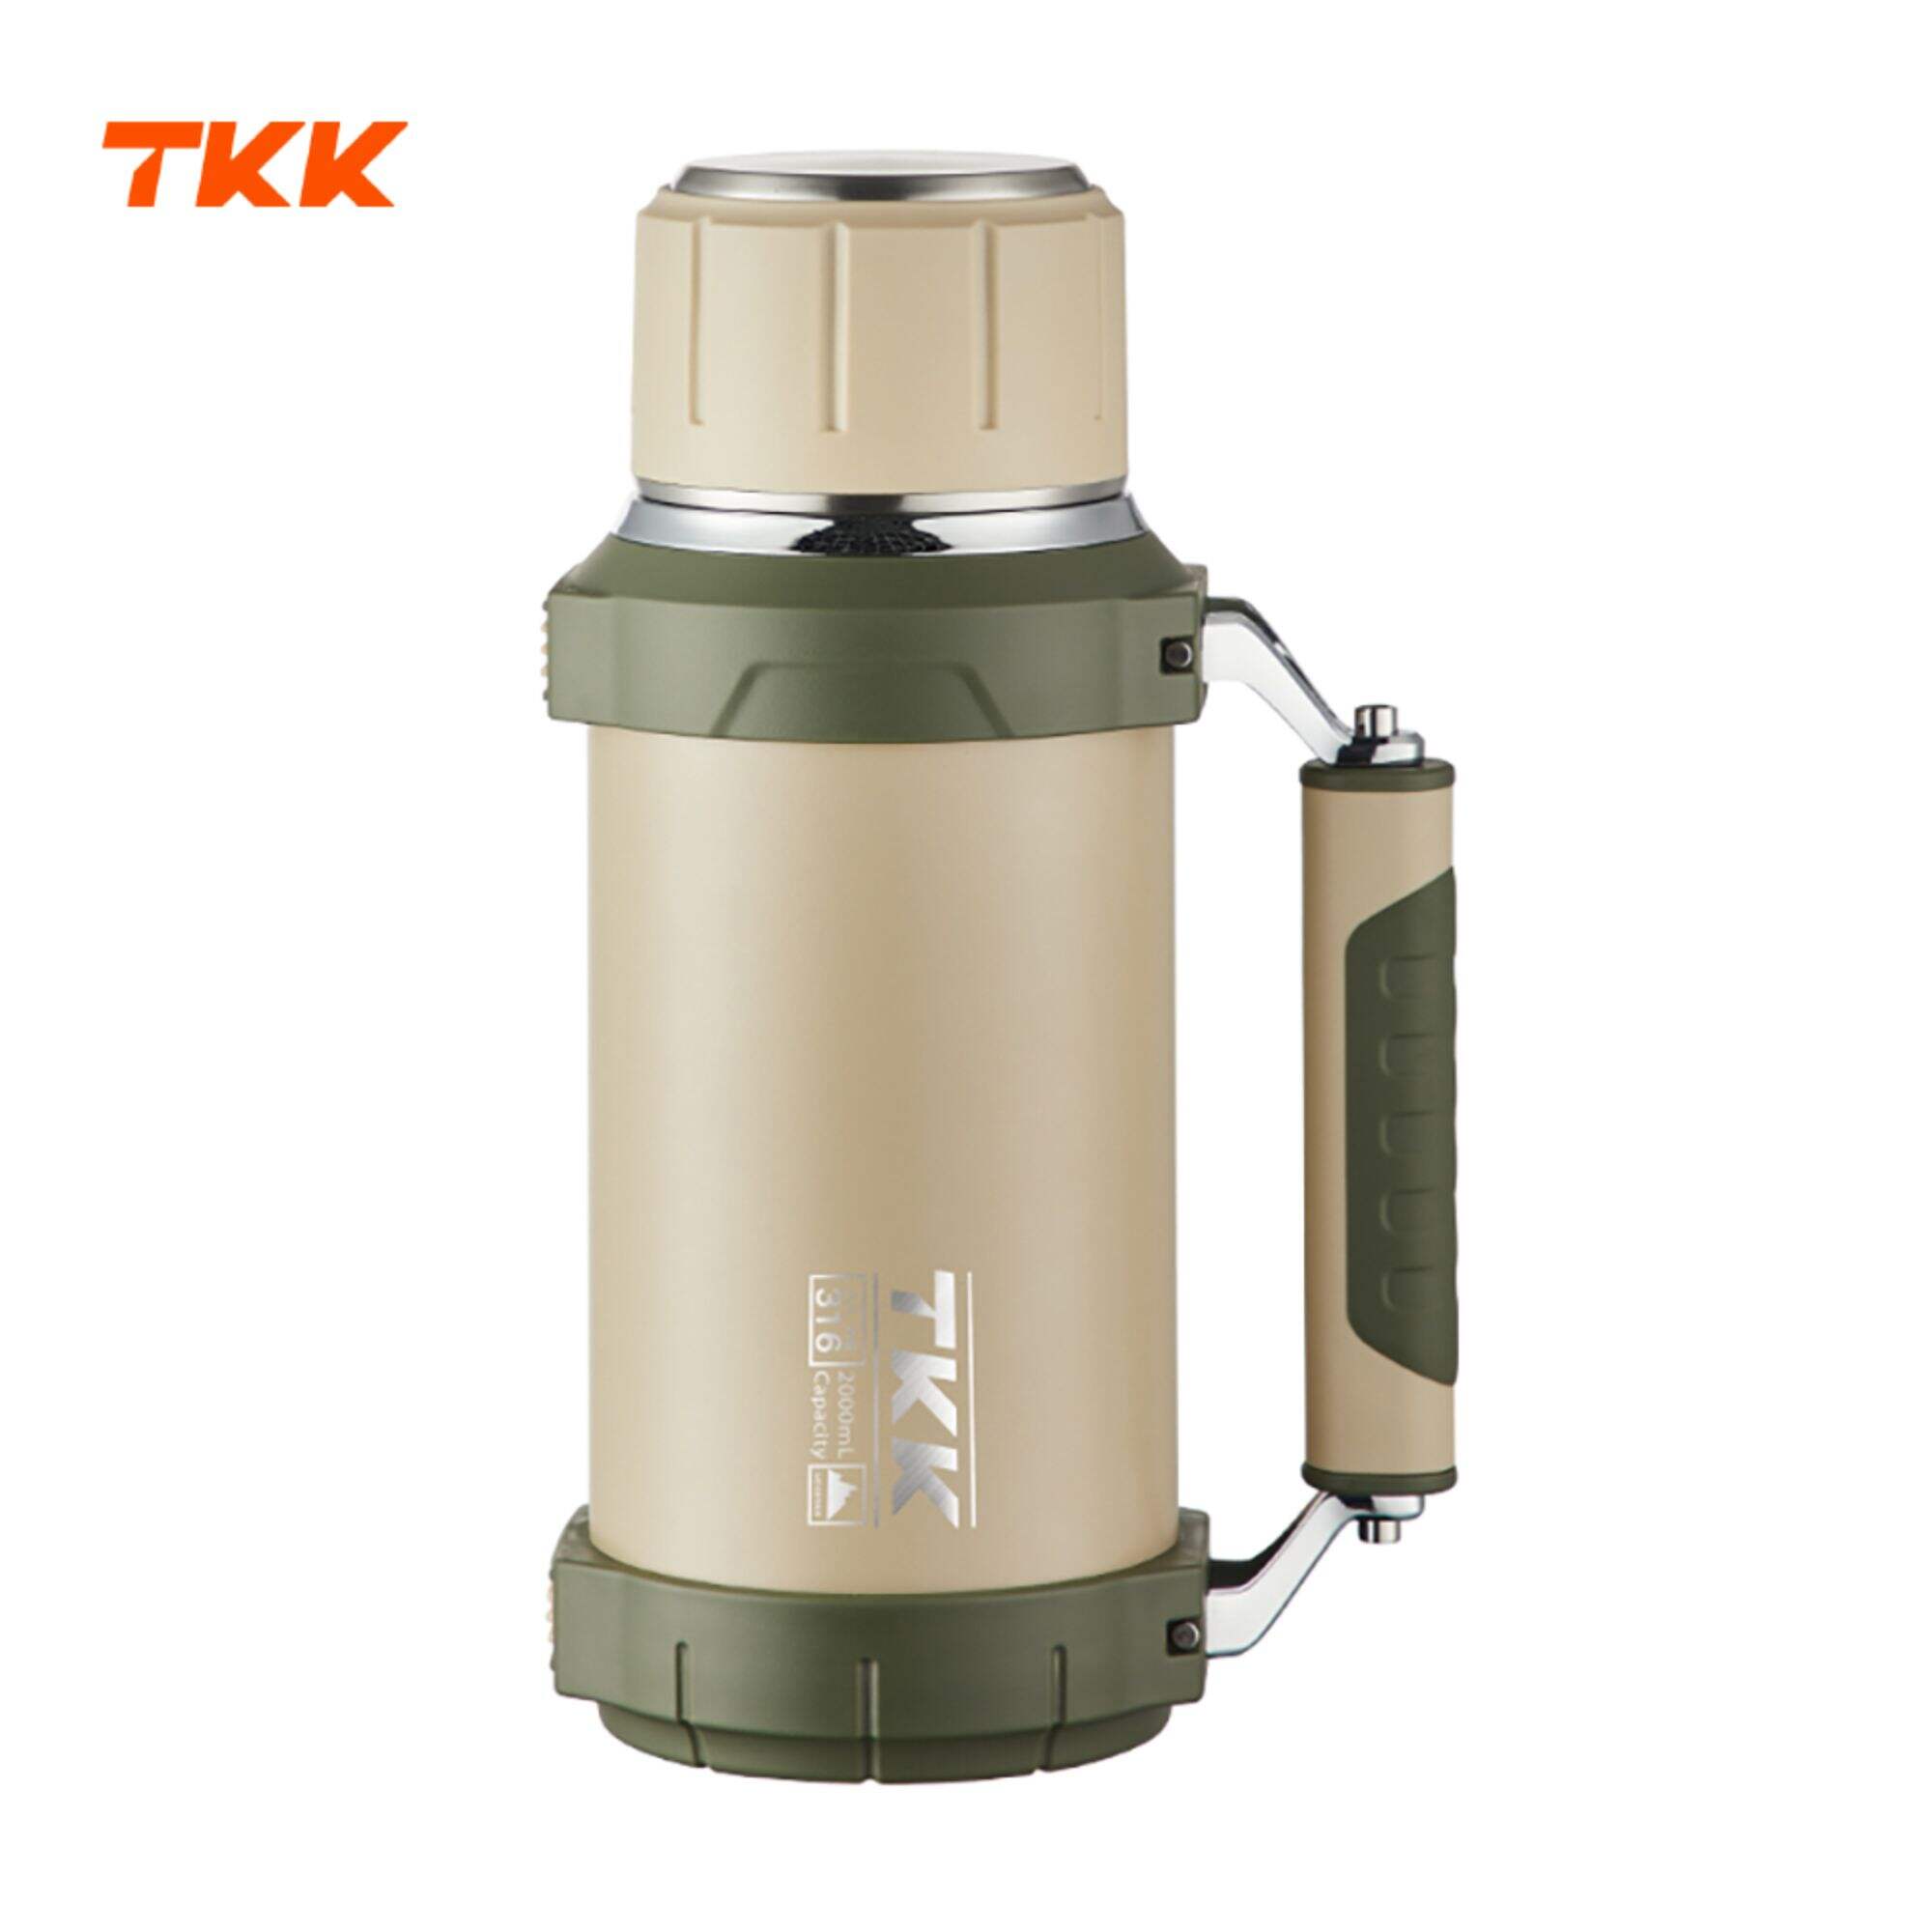 Large Coffee Thermos for Hot Drinks Stainless Steel Thermos 2QT 64oz Vacuum Insulated Bottle With Cup Handle Keeps Liquids Hot And Cold For Up To 24 For Outdoor Gathering Camping